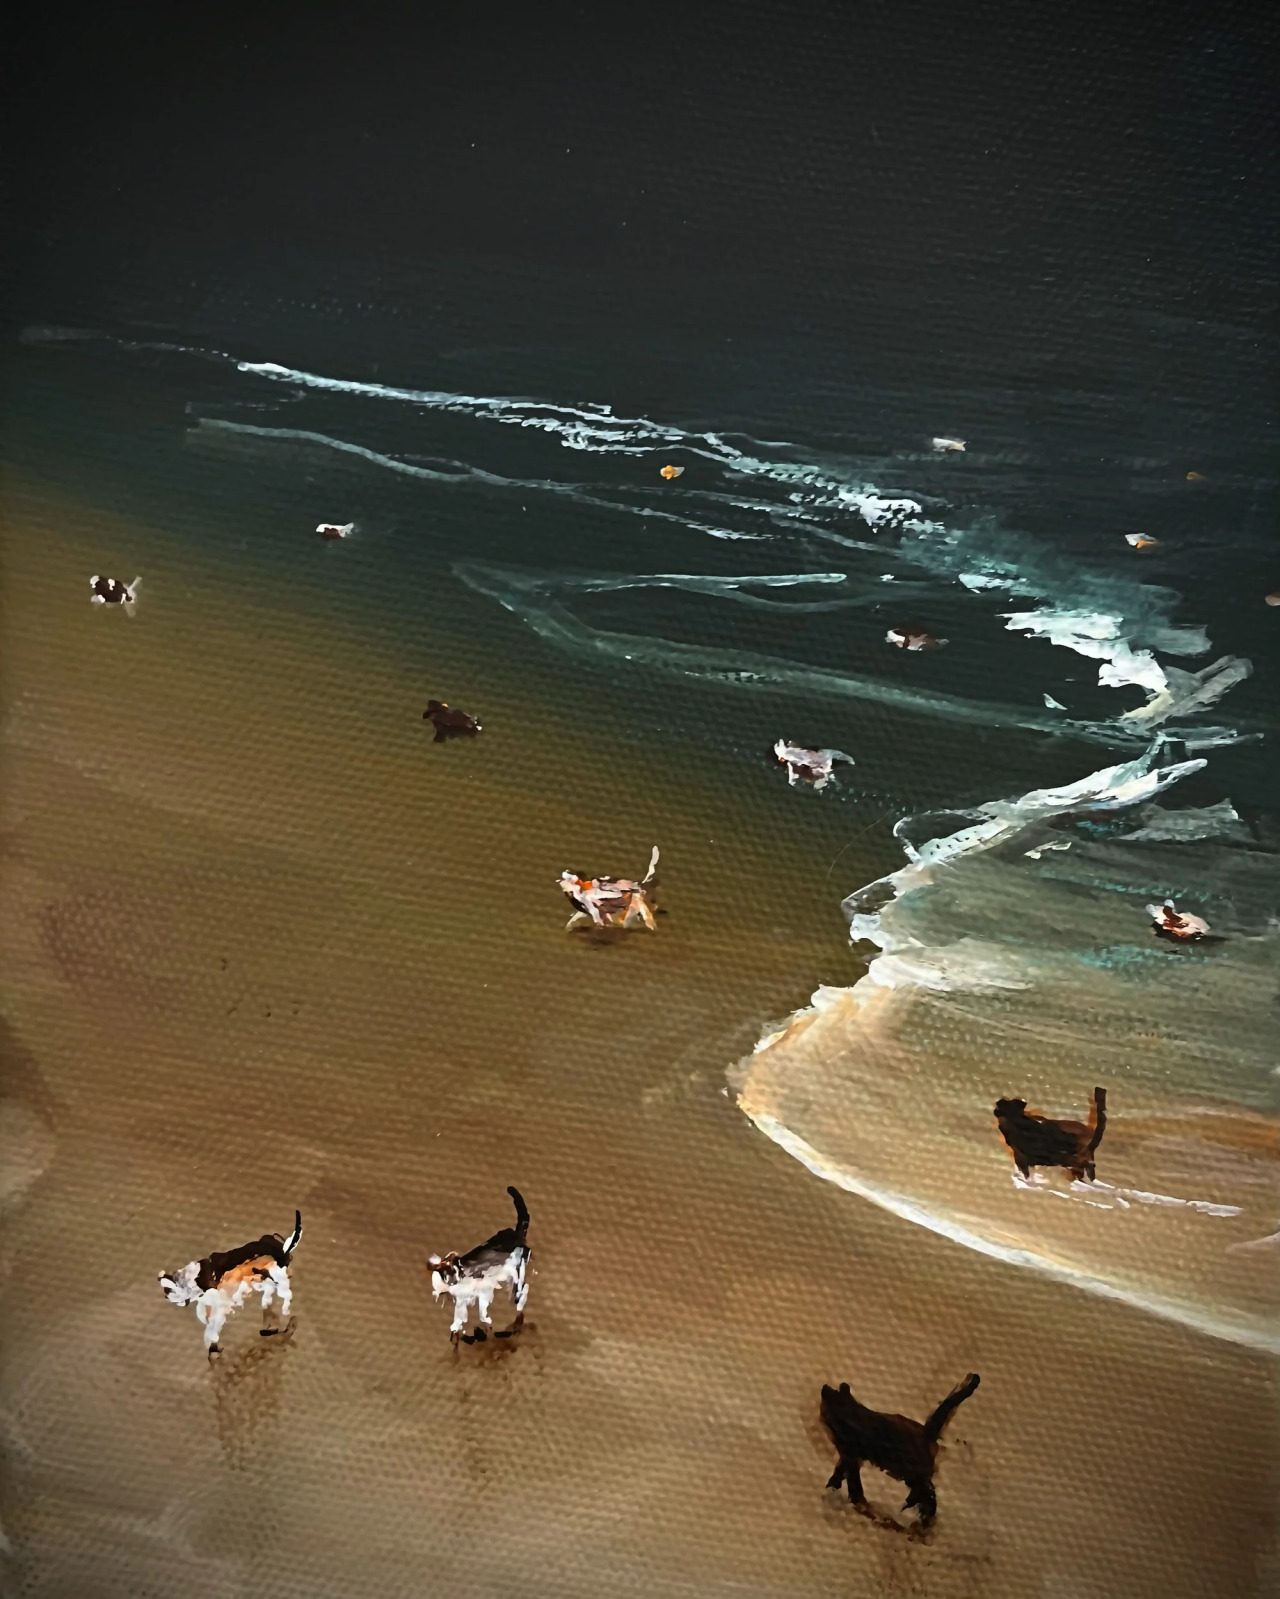 A painting of cats walking out of the ocean. In the background more cats can be seen swimming toward the shore.